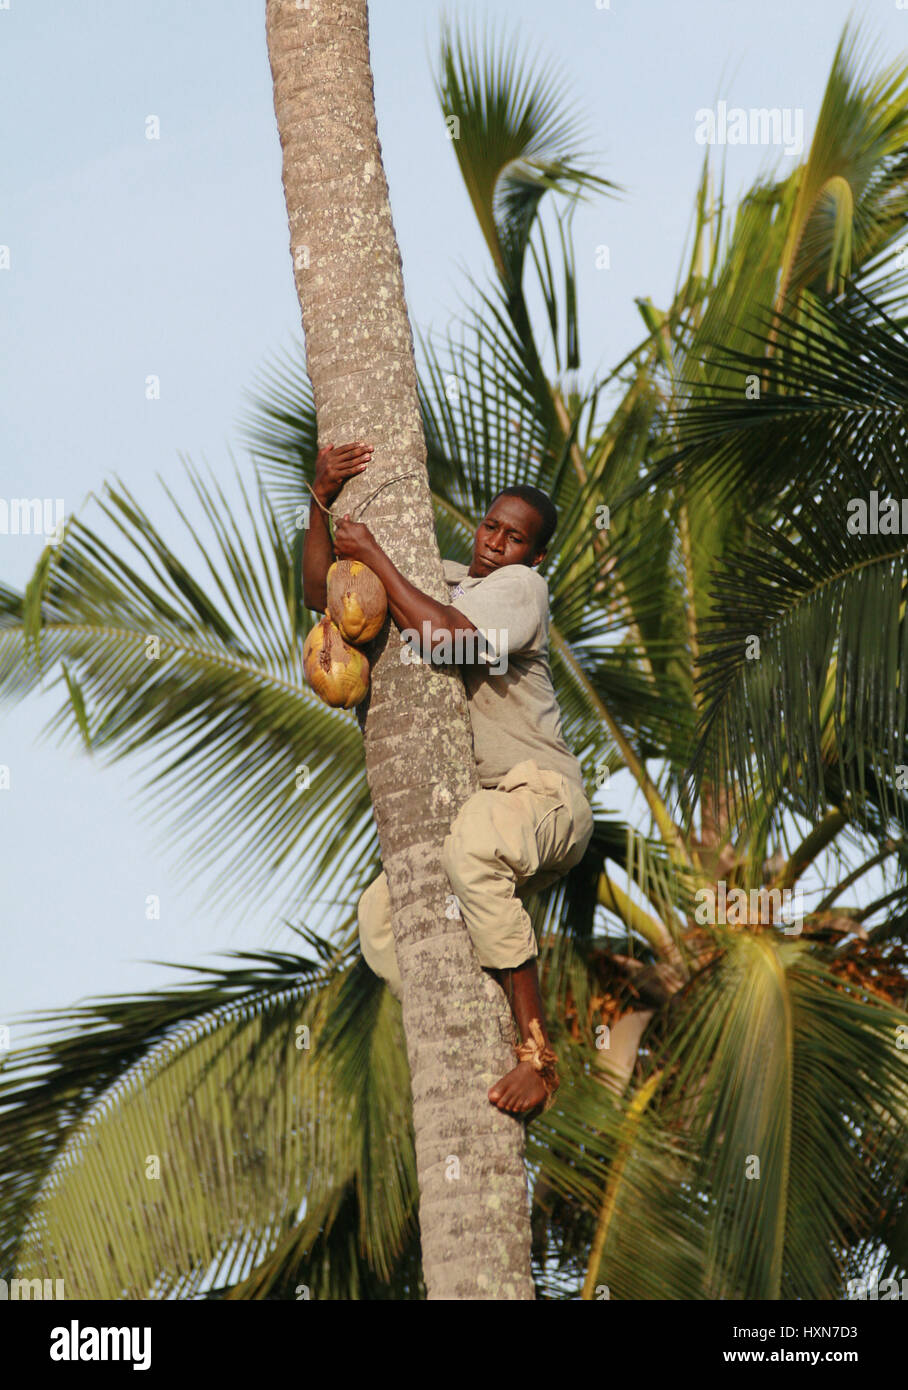 Zanzibar, Tanzania - February 18, 2008: One unknown young African man, approximate age 25-30 years down from palm trees with coconut in hands. Stock Photo